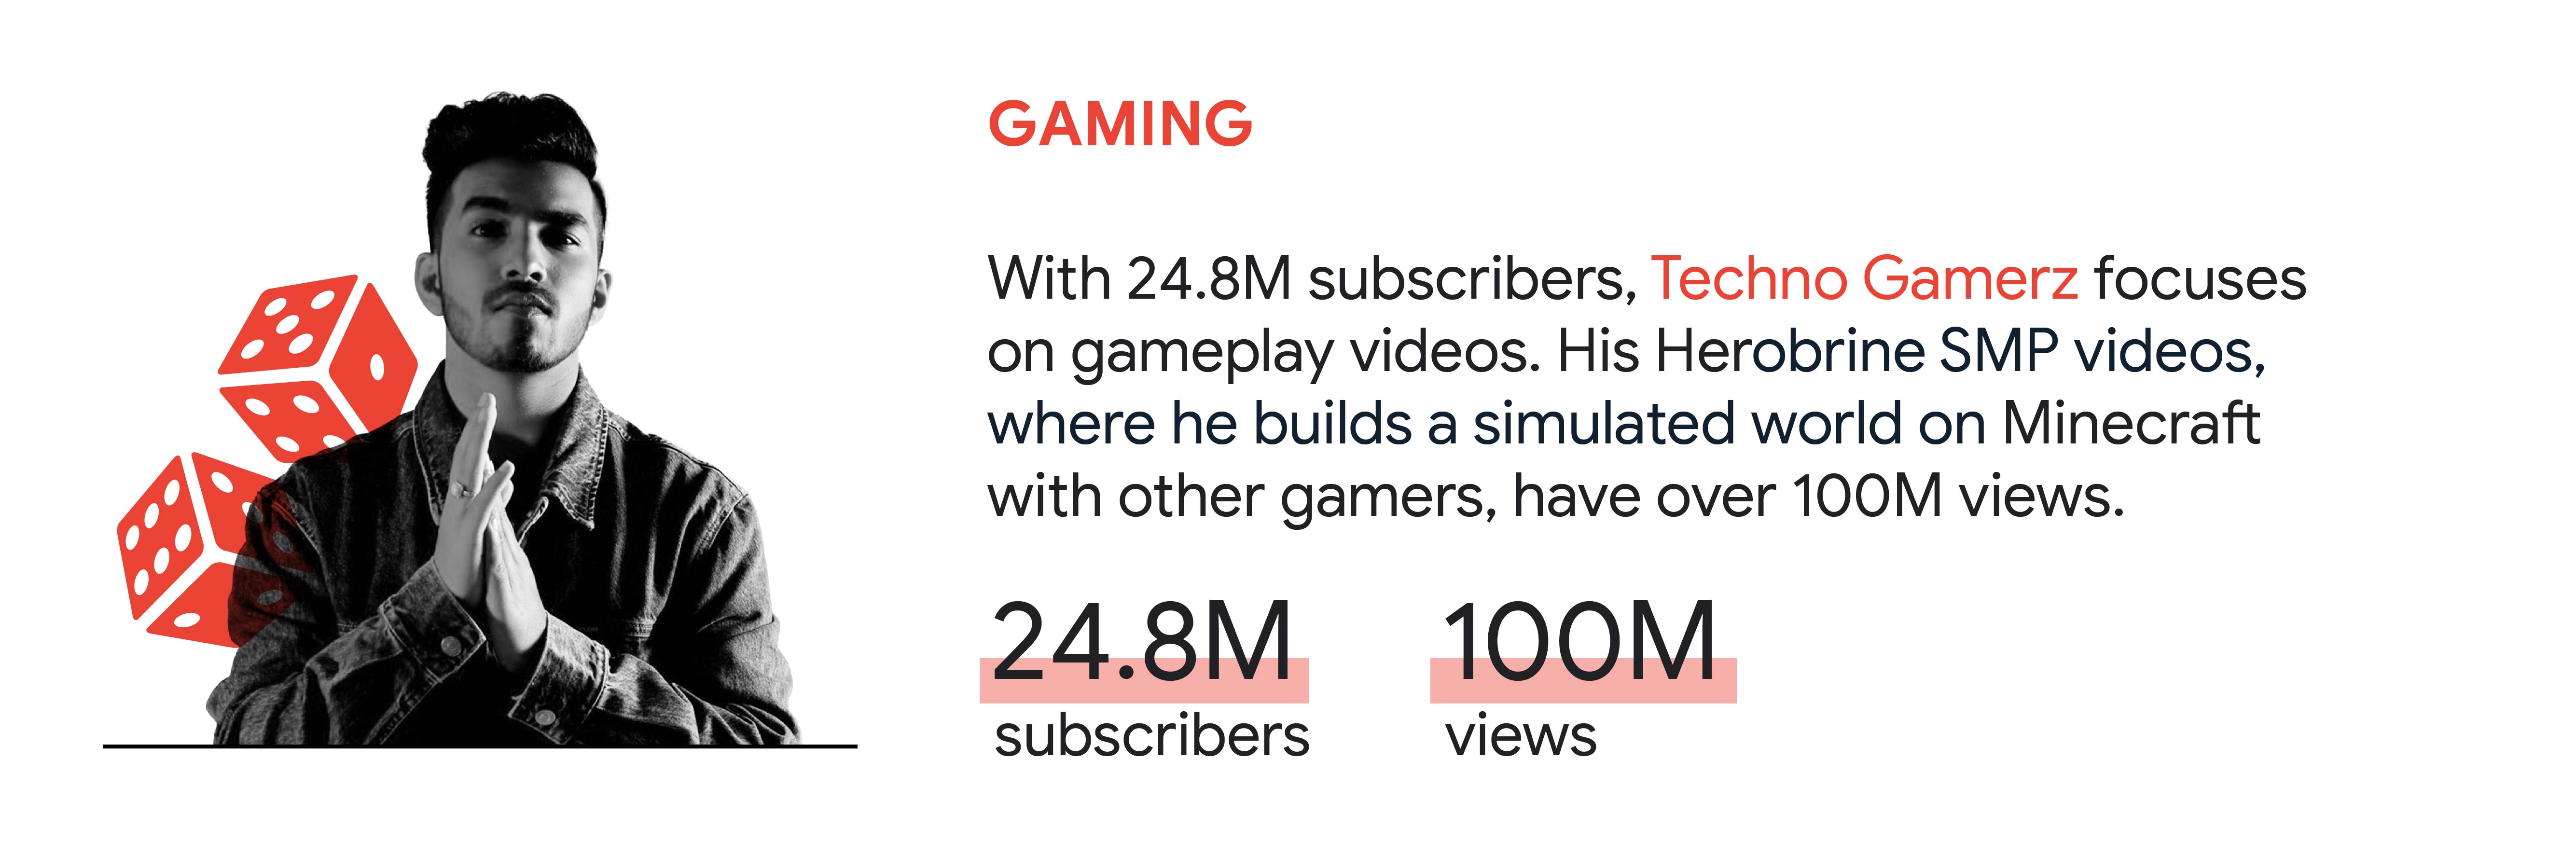 YouTube trend 3: Gaming. In India, Techno Gamerz, who has 24.8M subscribers, focuses on gameplay videos. His Herobrine SMP videos, where he builds a simulated world on Minecraft with other gamers, have over 100M views.